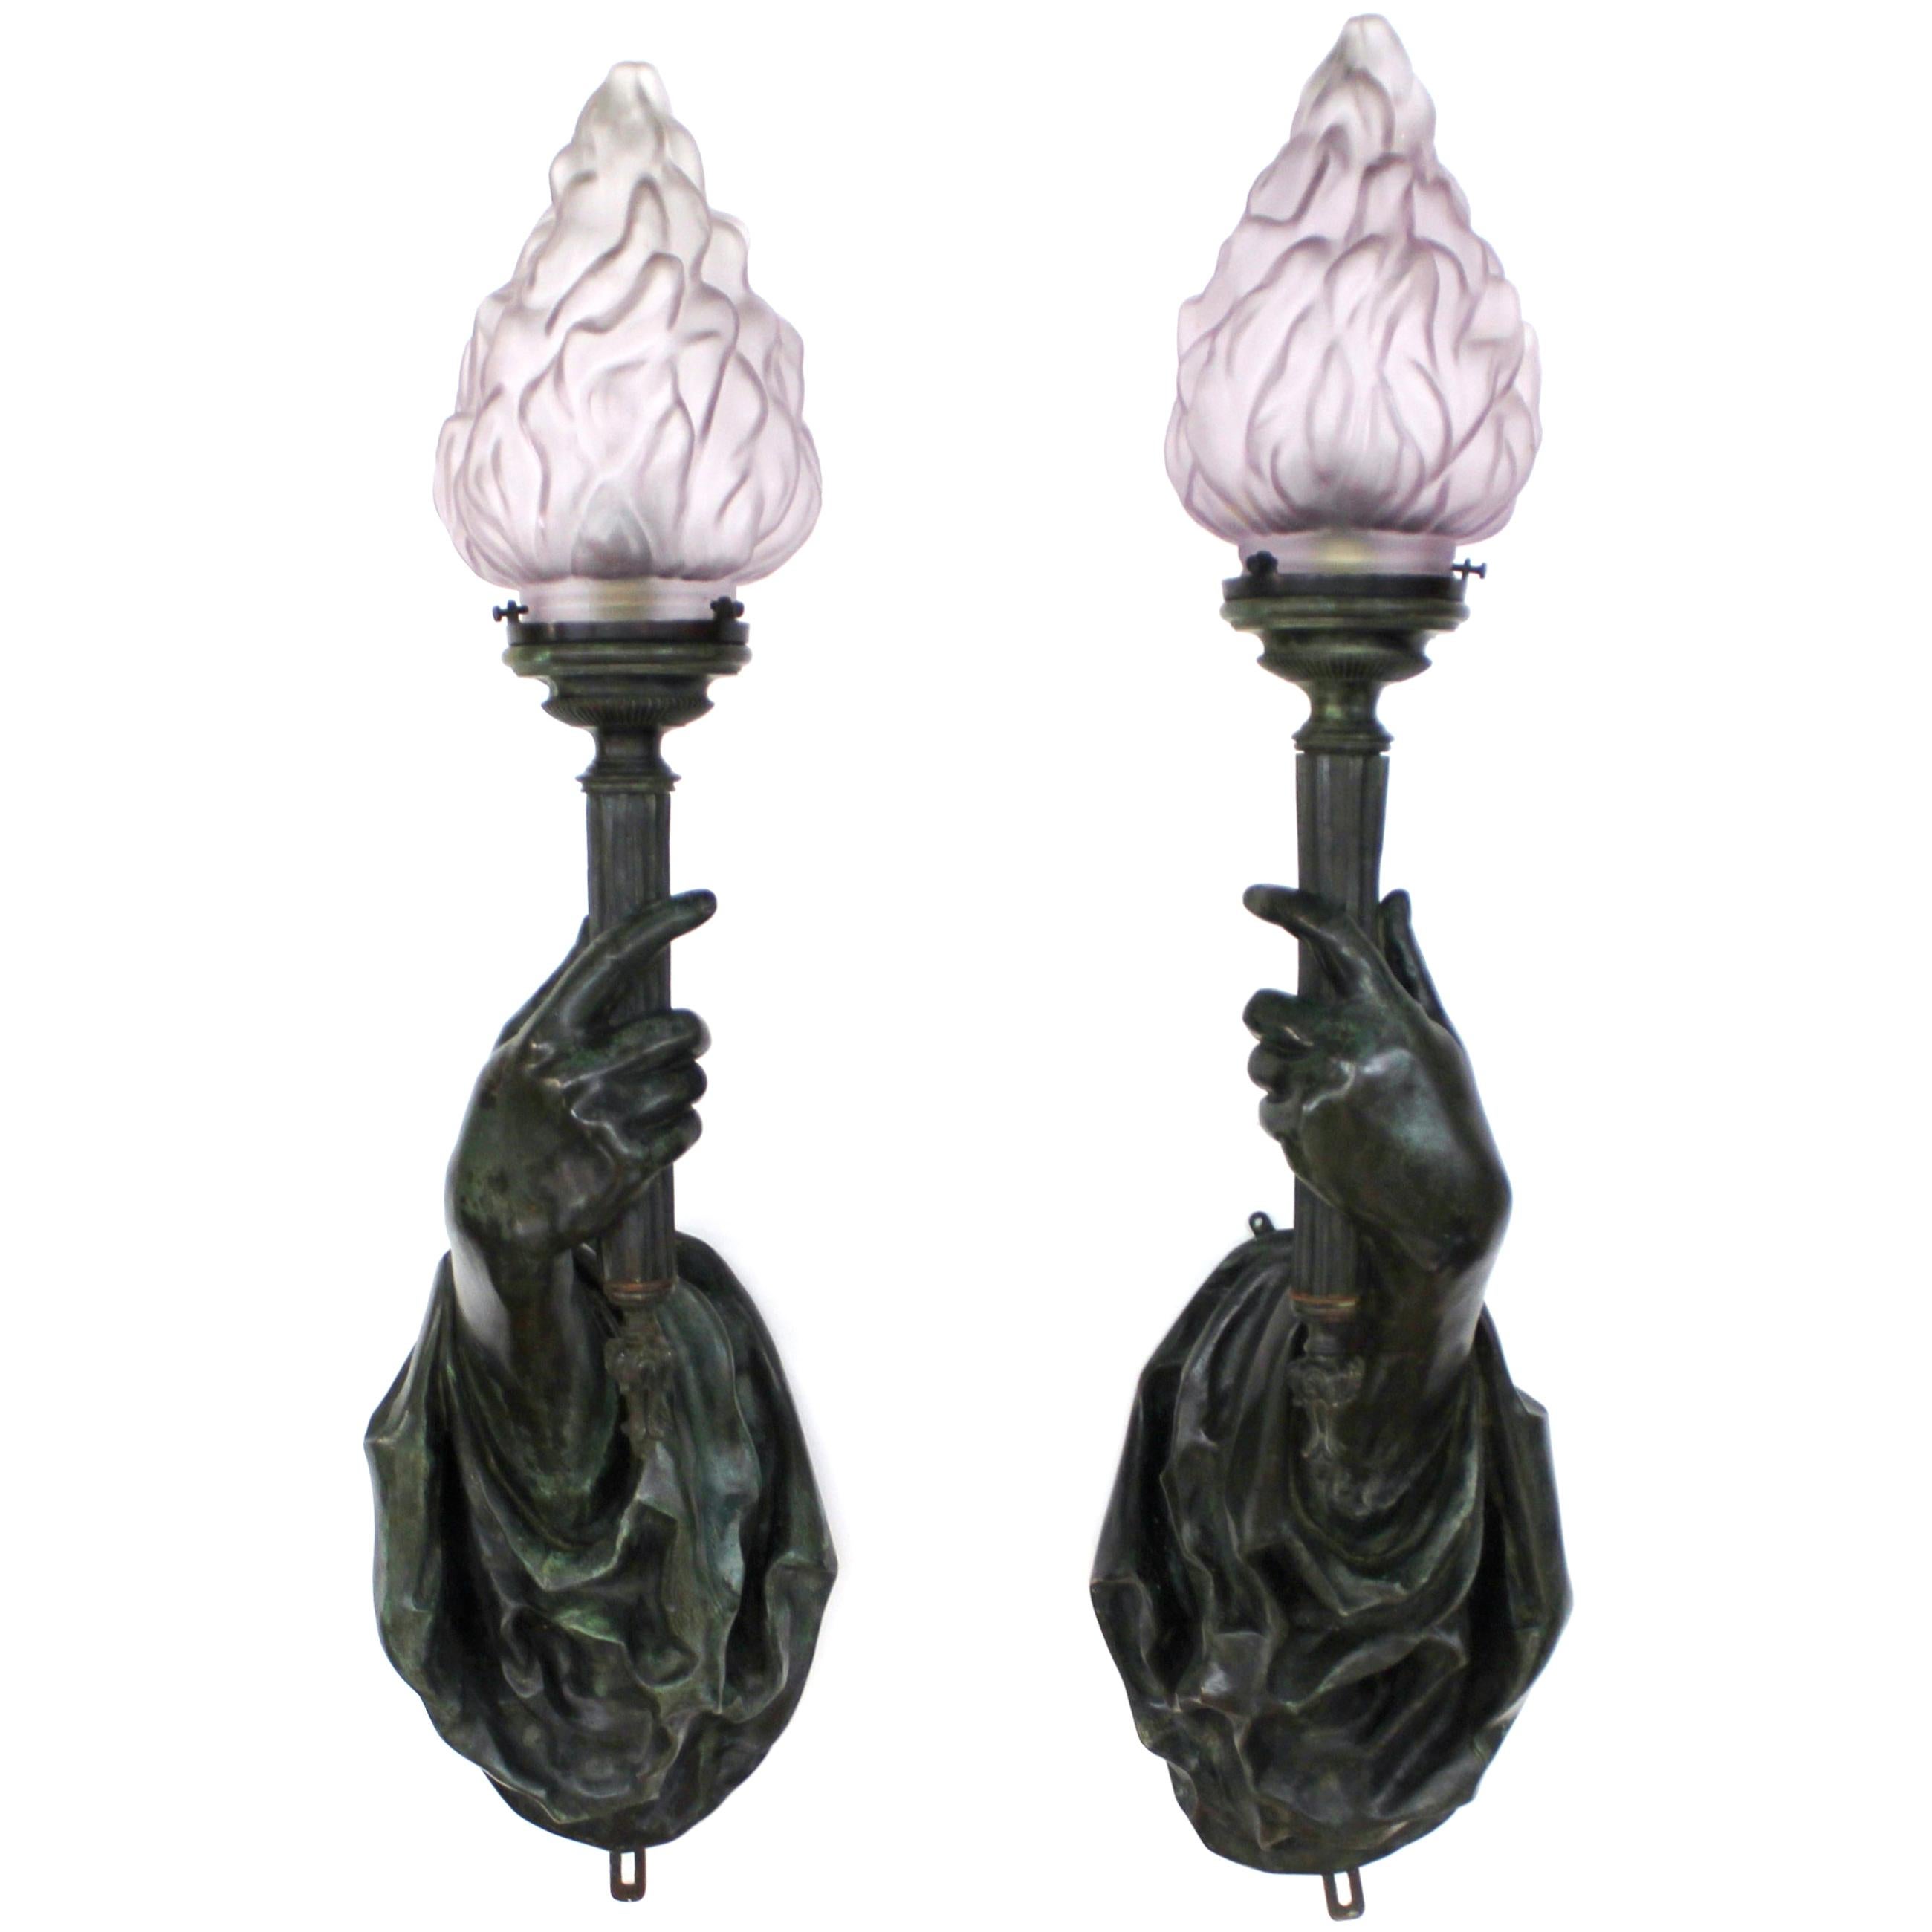 Caldwell Attributed Gilded Age Bronze Hand Torchiere Wall Sconces